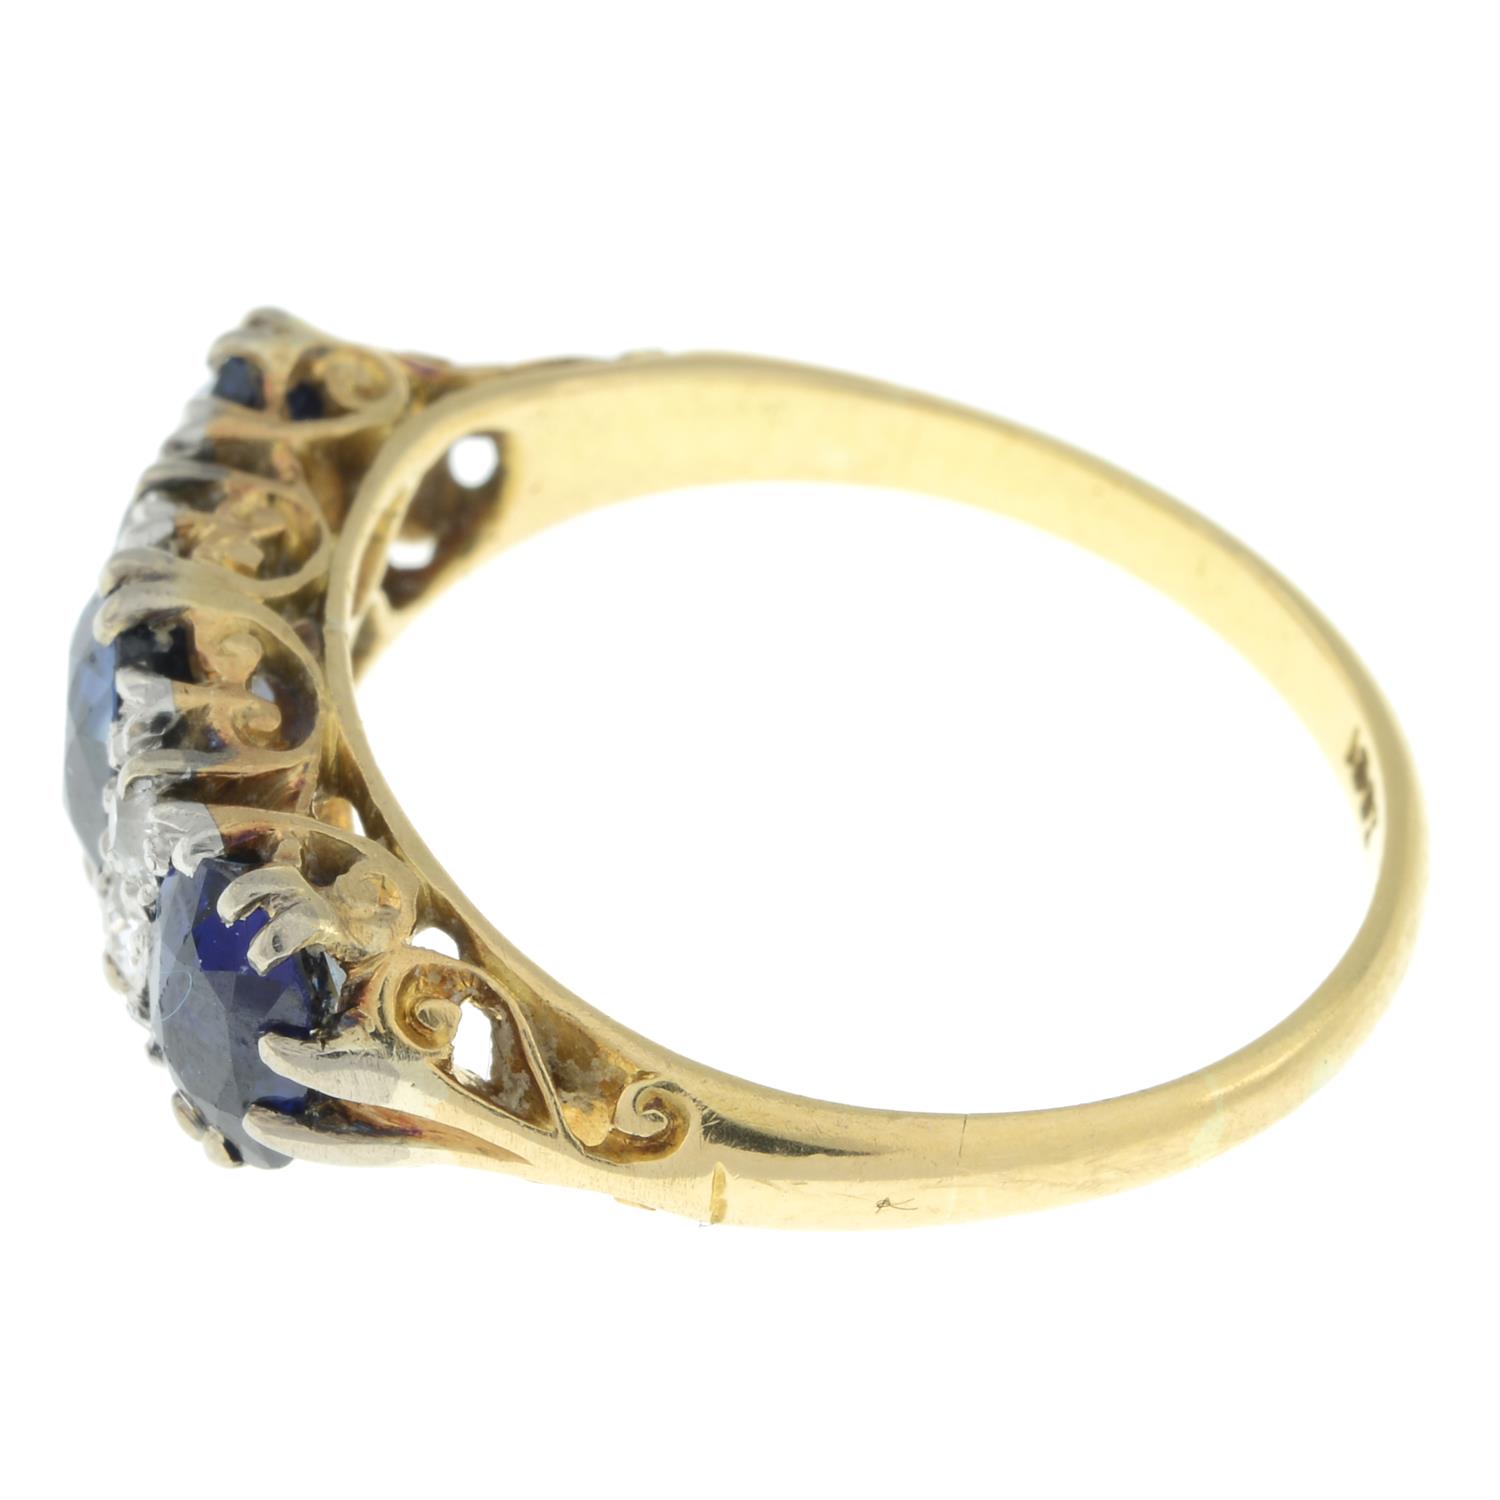 Early 20th century 18ct gold sapphire and diamond ring - Image 4 of 5